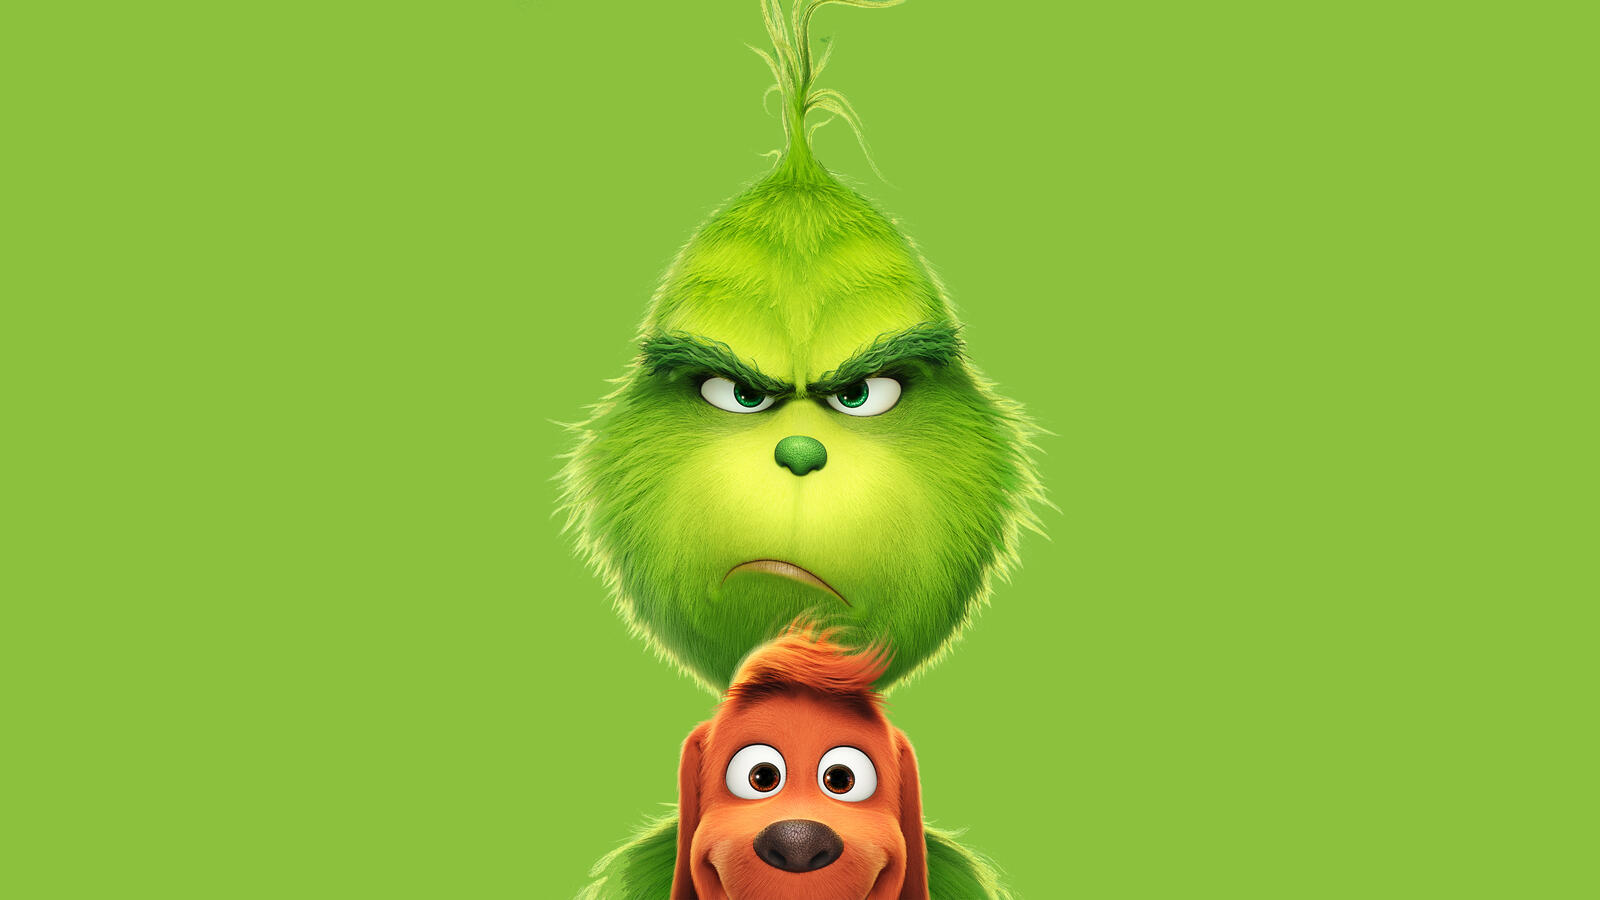 Wallpapers the grinch 2018 movies movies on the desktop